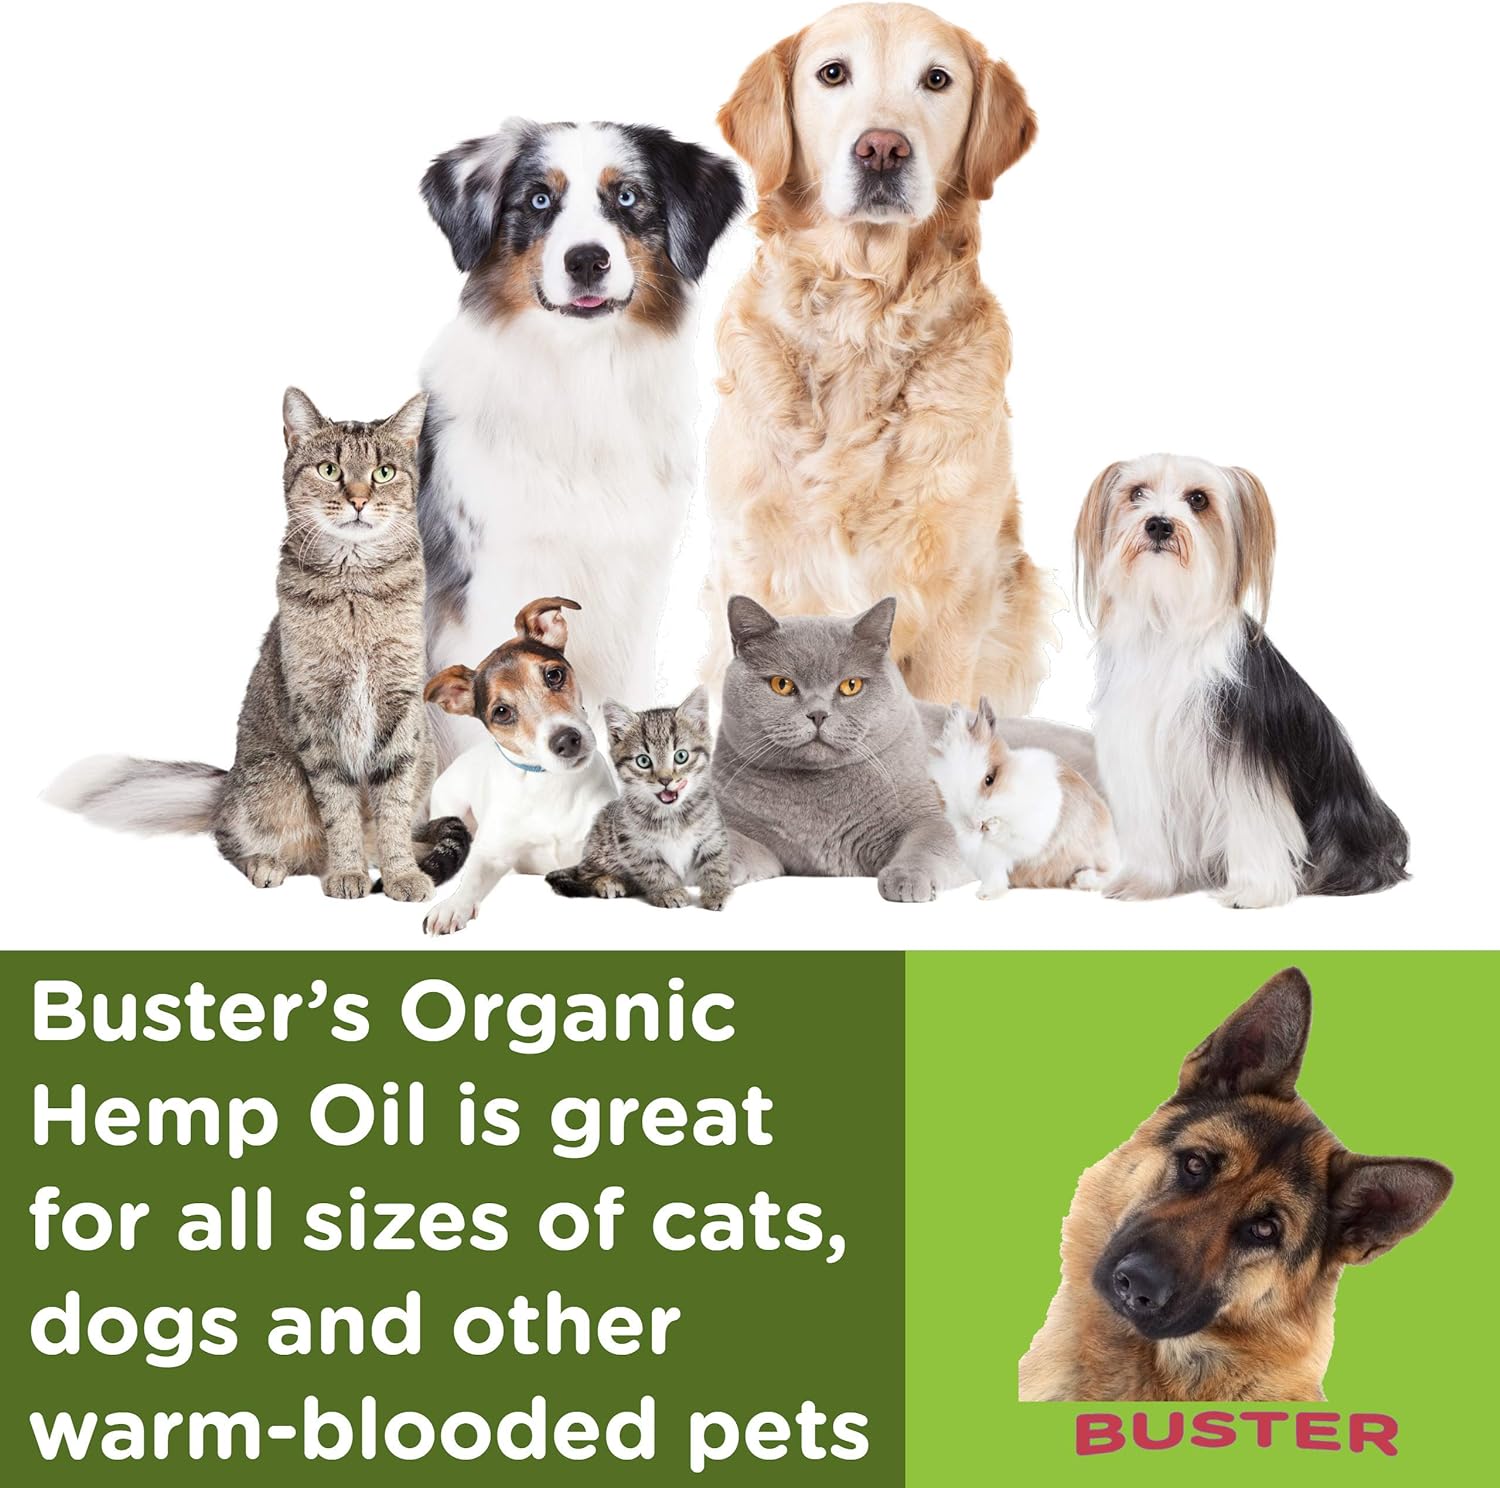 Buster's Organic Hemp Oil Large 60 Milliliters 2-Pack for Dogs & Cats - Max Potency - Made in USA - Omega Rich 3, 6 & 9 - Hip & Joint Health, Natural Relief, Calming (60,000MG) : Pet Supplies